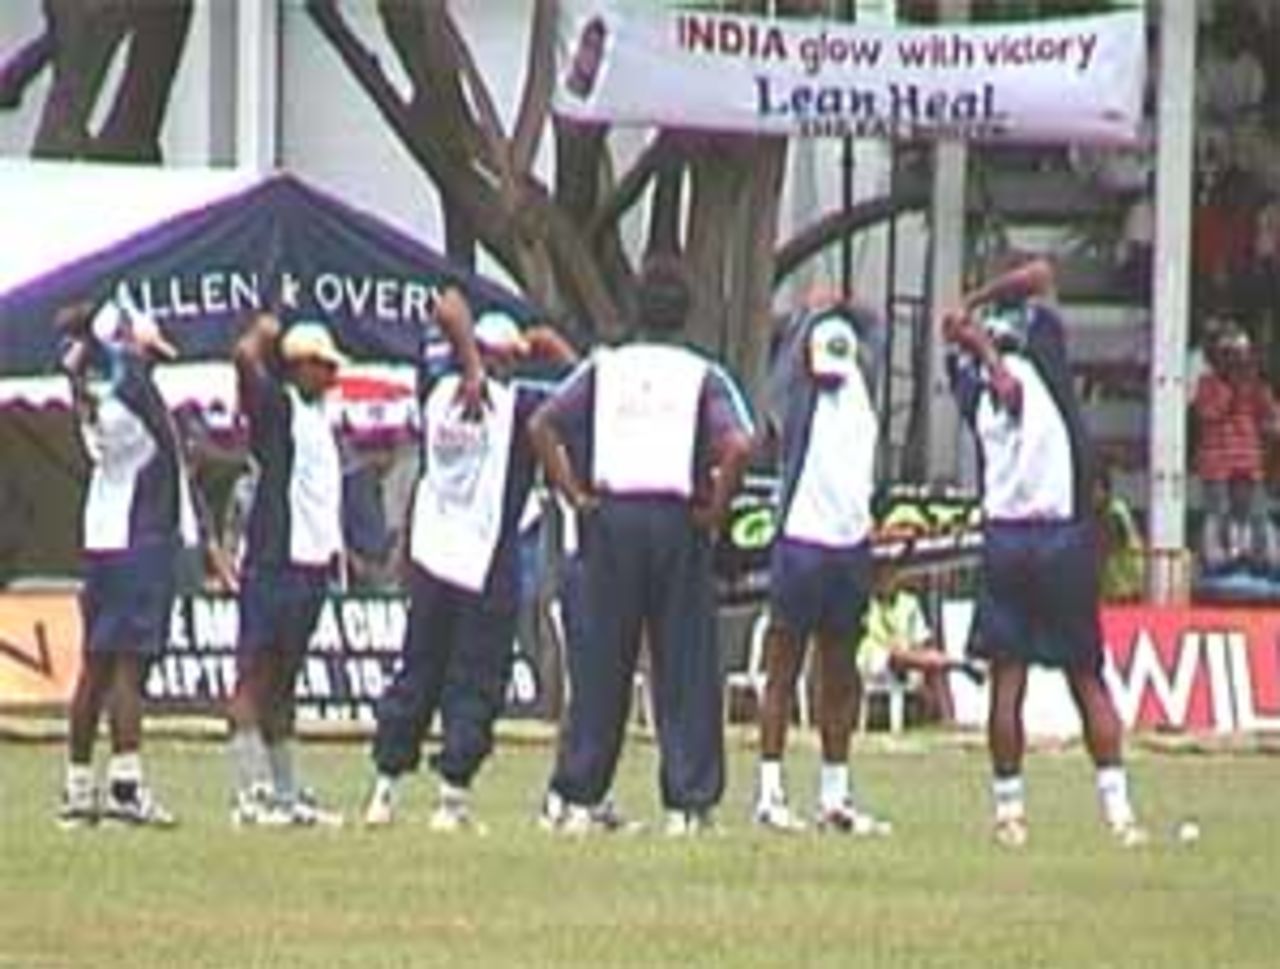 Indians stretching on the Ground, India v West Indies (3rd ODI), Coca-Cola Singapore Challenge, 1999-2000, Kallang Ground, Singapore, 5 Sep 1999.